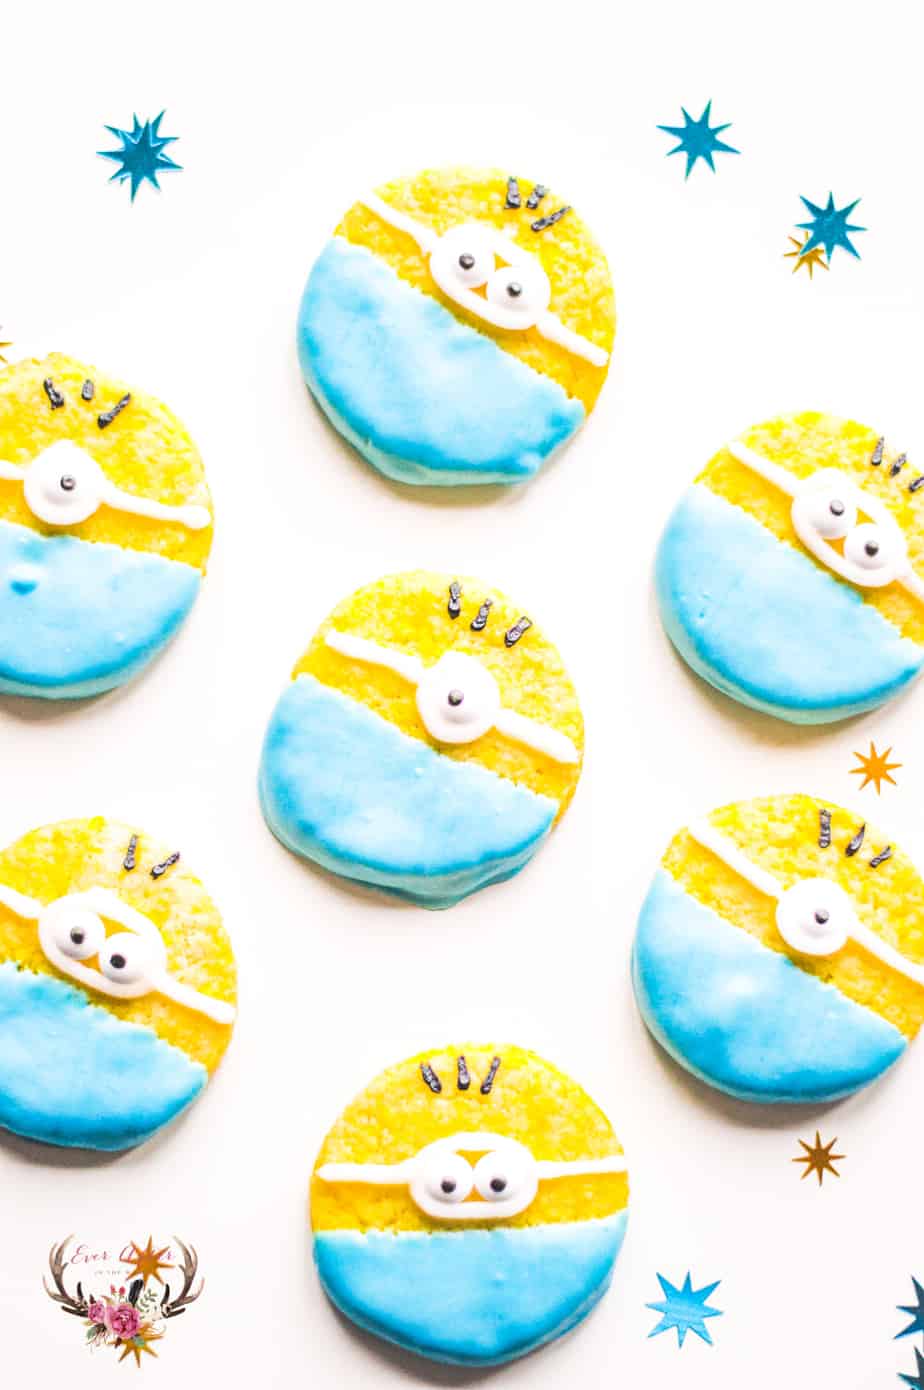 Minion sugar cookies are the perfect dessert for a cute Despicable Me birthday party